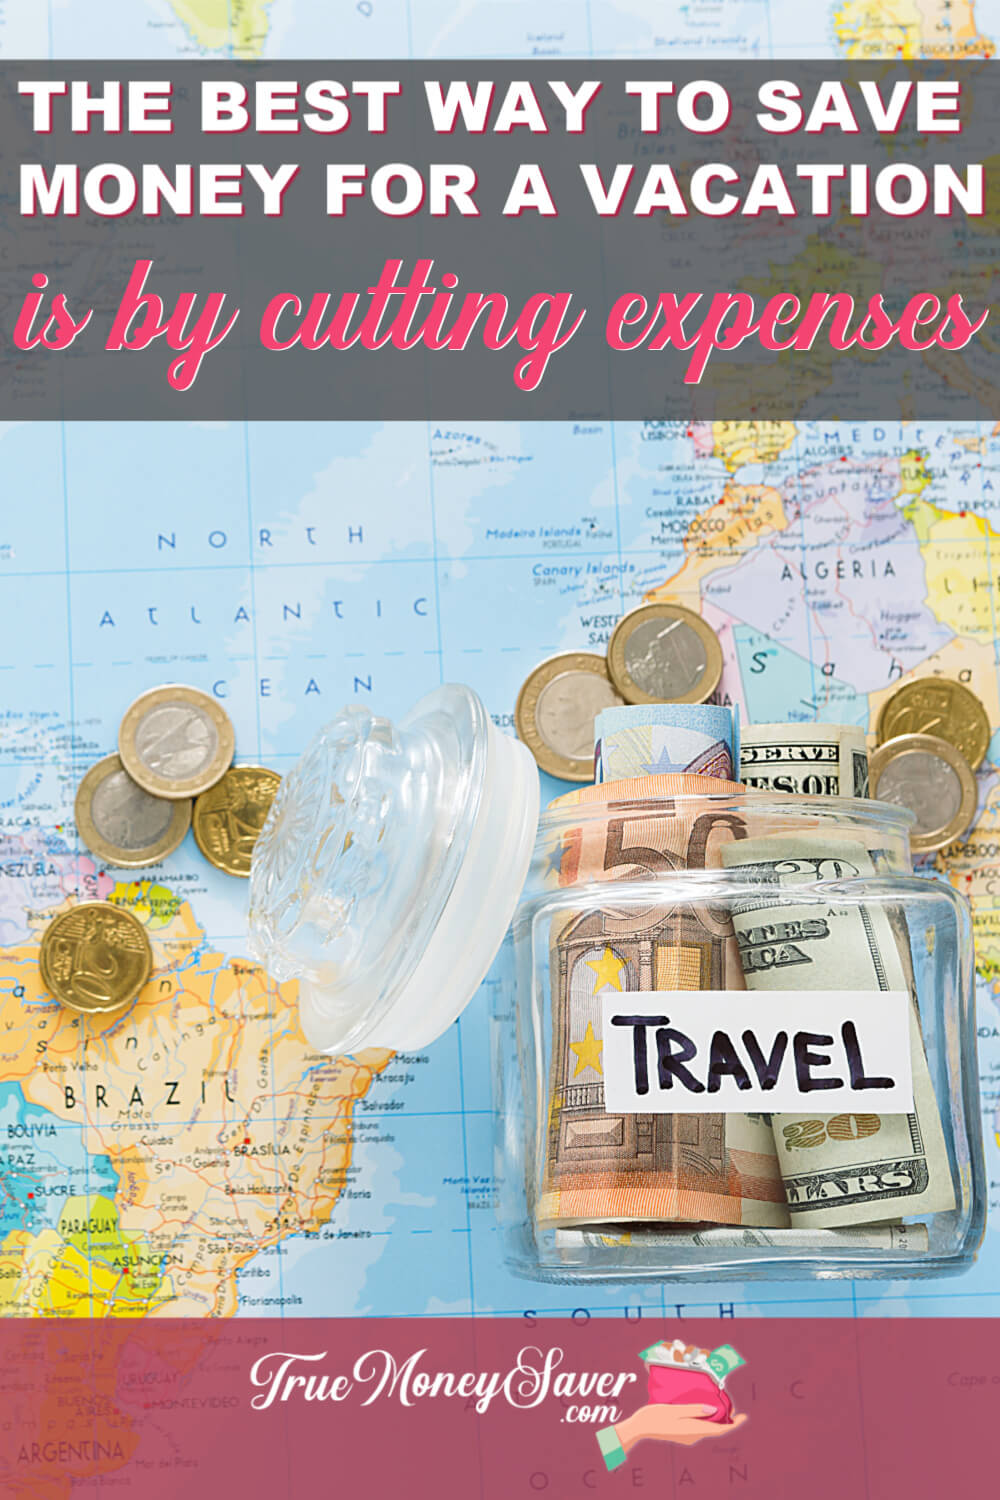 The Best Way To Save Money For A Vacation Is By Cutting Expenses